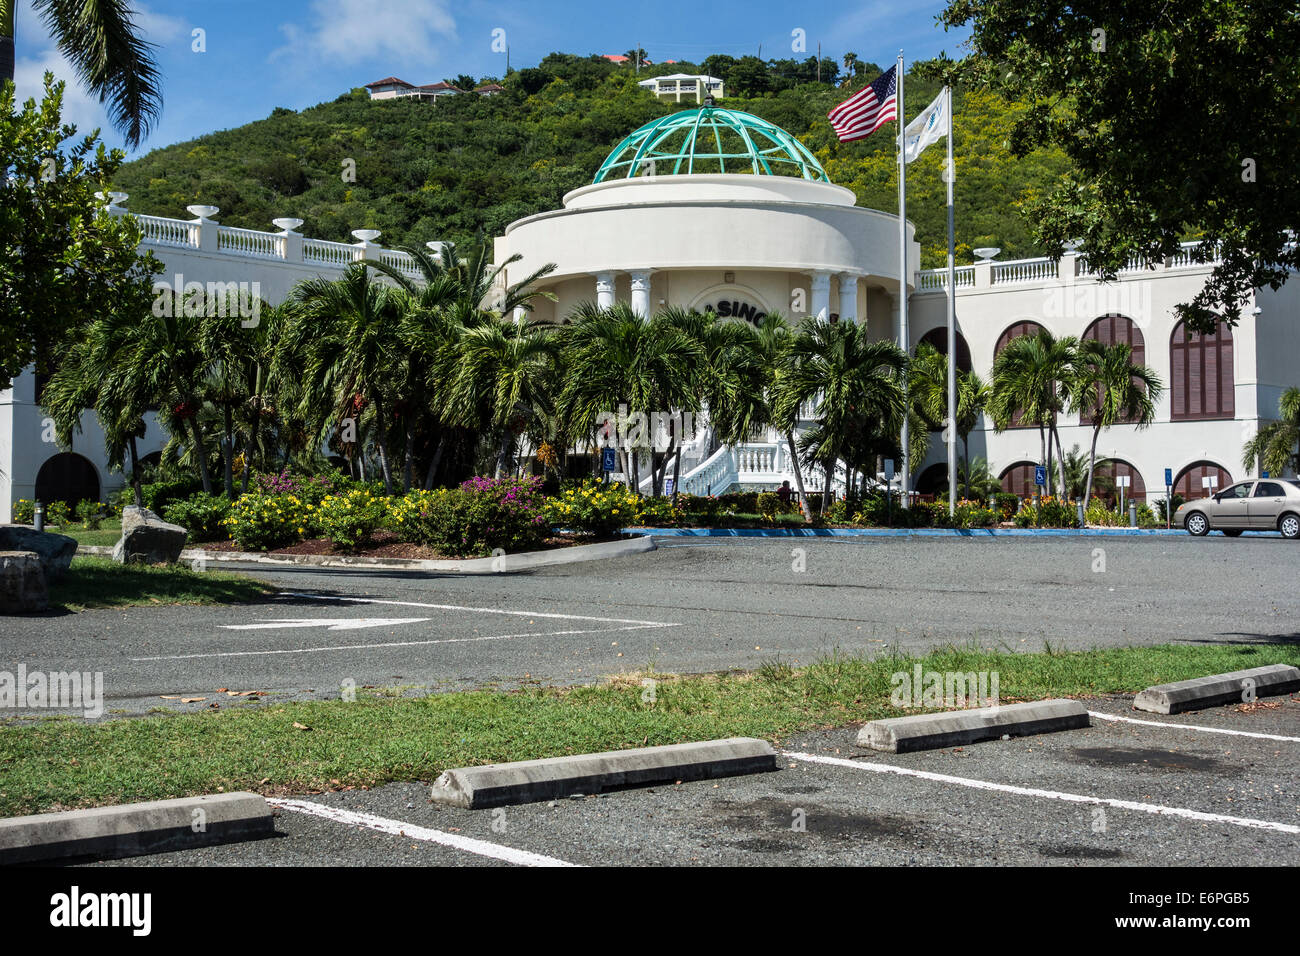 Casino at the Divi Carina Bay on the east end of St. Croix, U.S. Virgin Islands Stock Photo